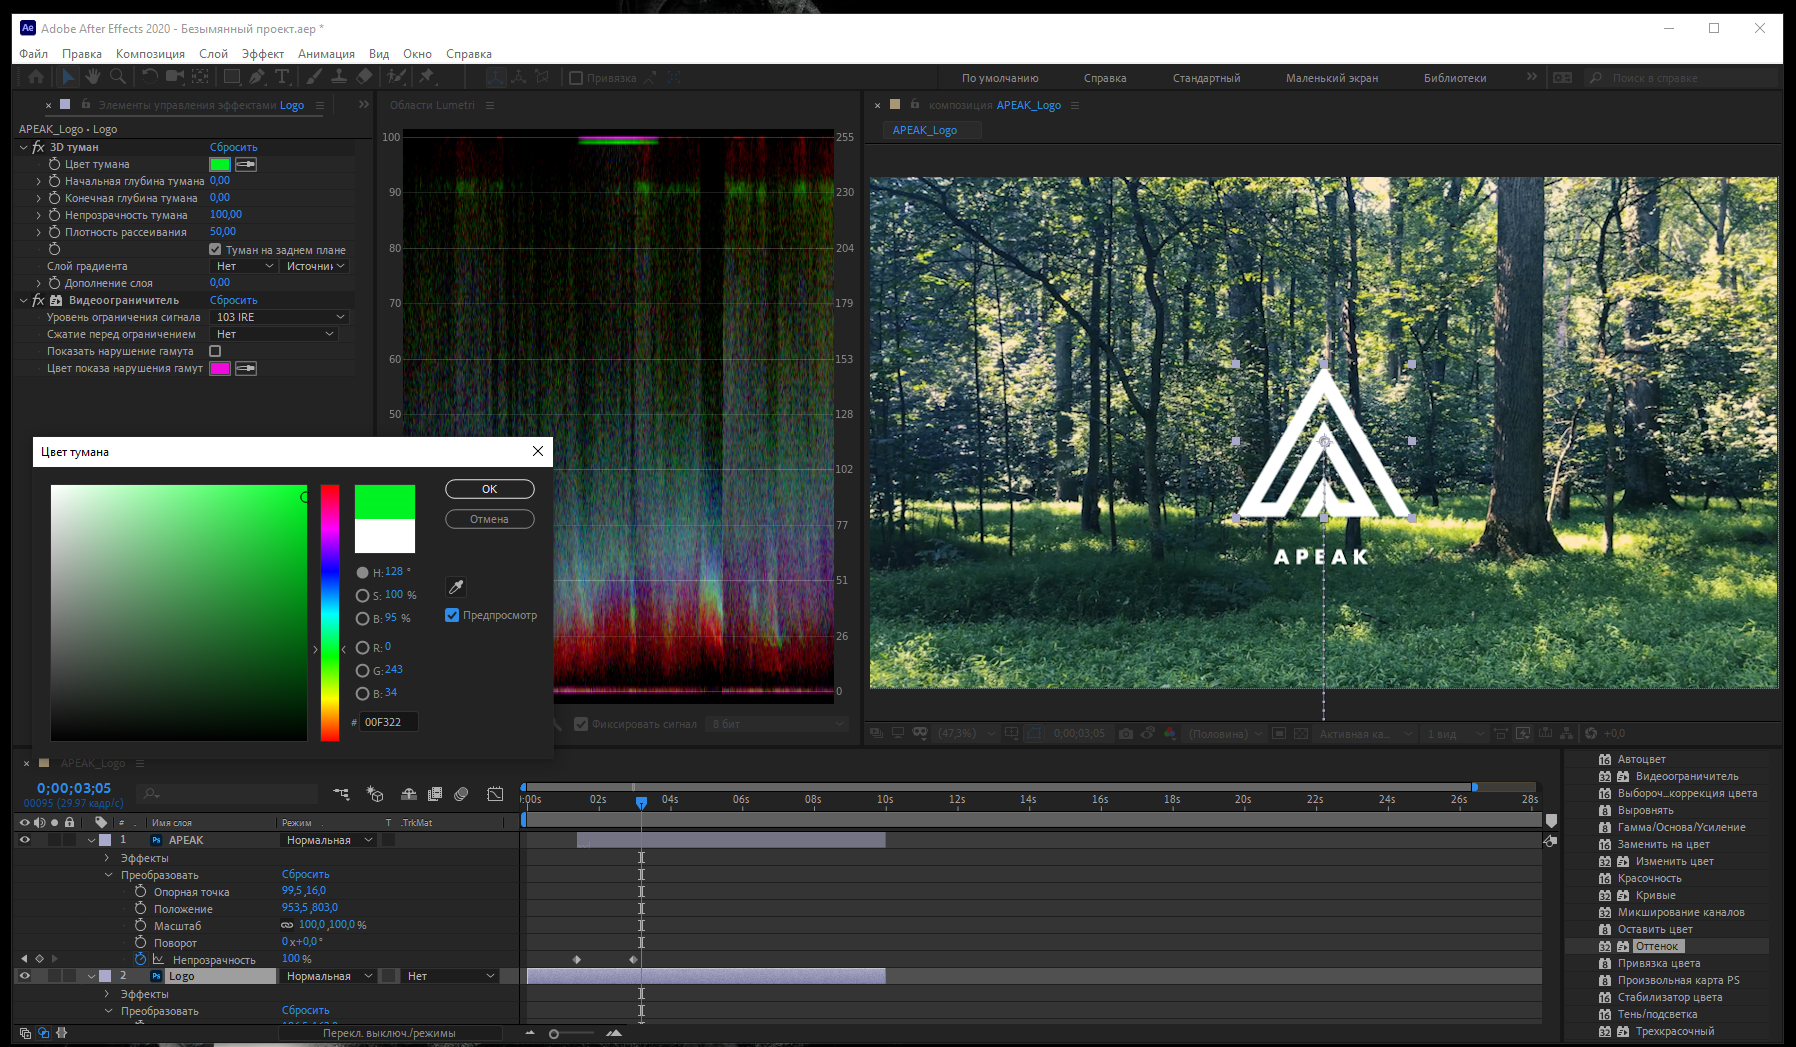 After effects packs. Интерфейс after Effects 2020. Адобе Афтер эффект 2020. Адоб Автор эффект. Adobe after Effects 2020.